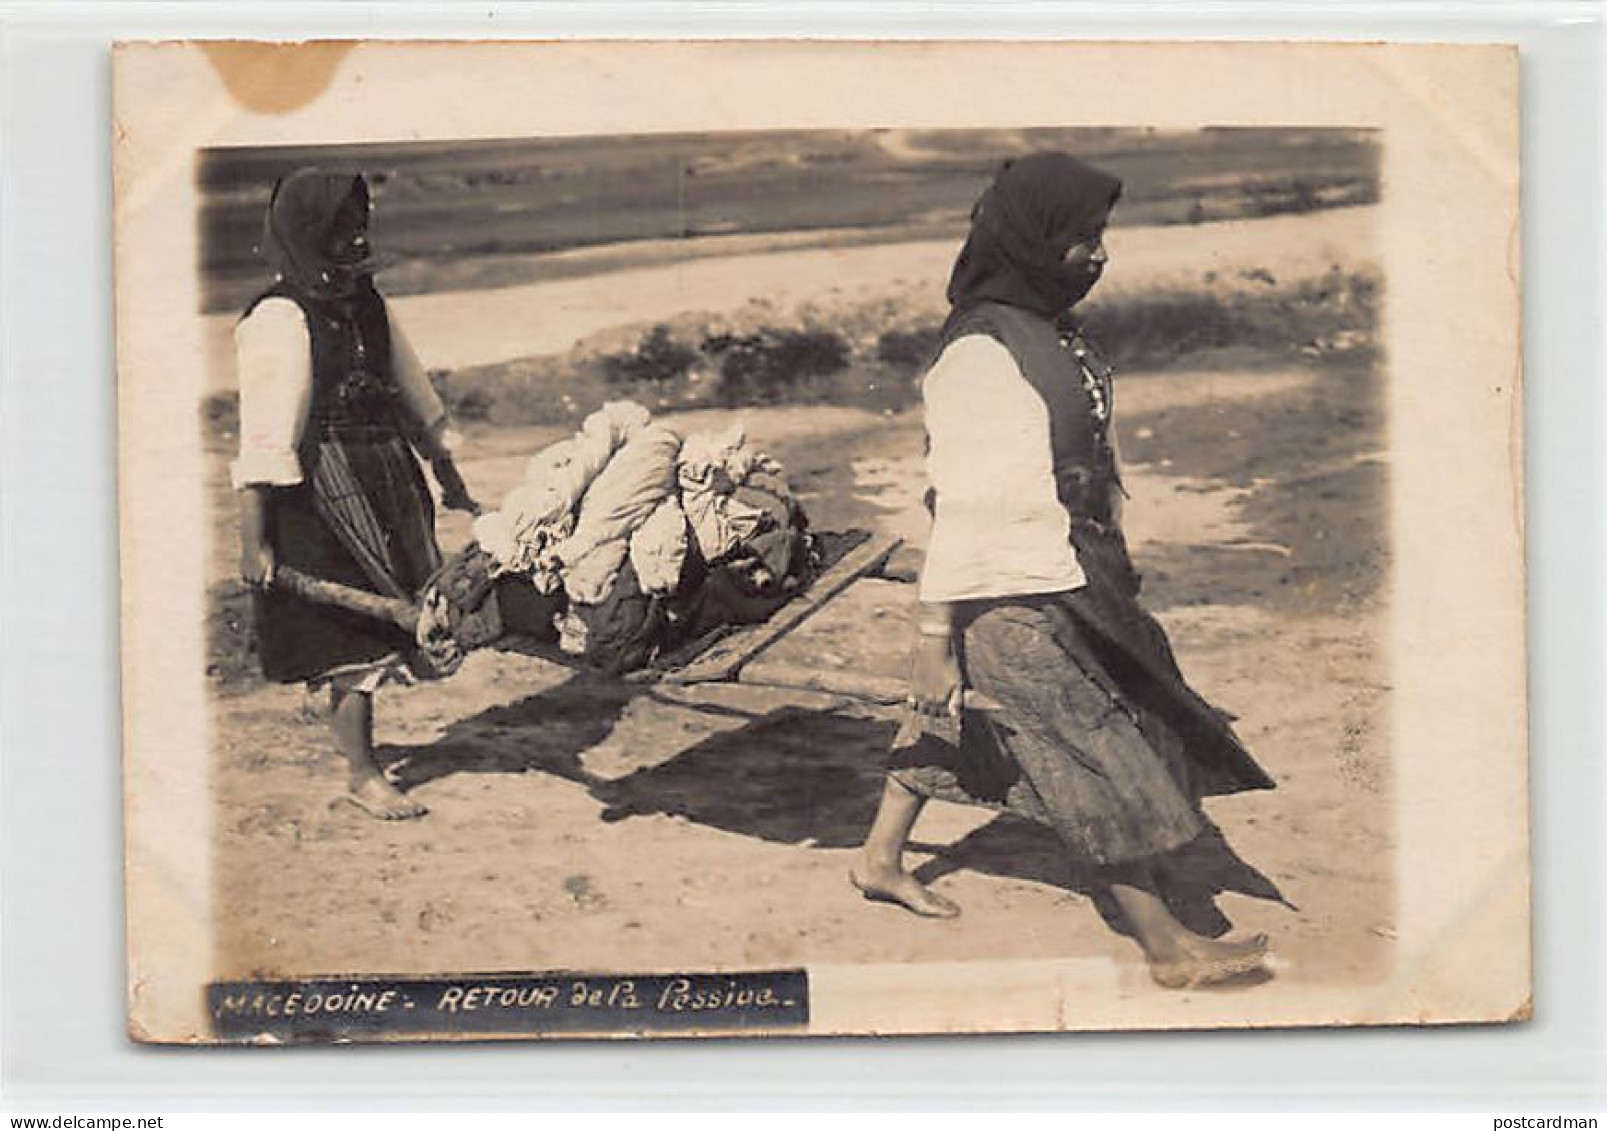 Macedonia - Women Back From The Laundry - PHOTOGRAPH - Nordmazedonien